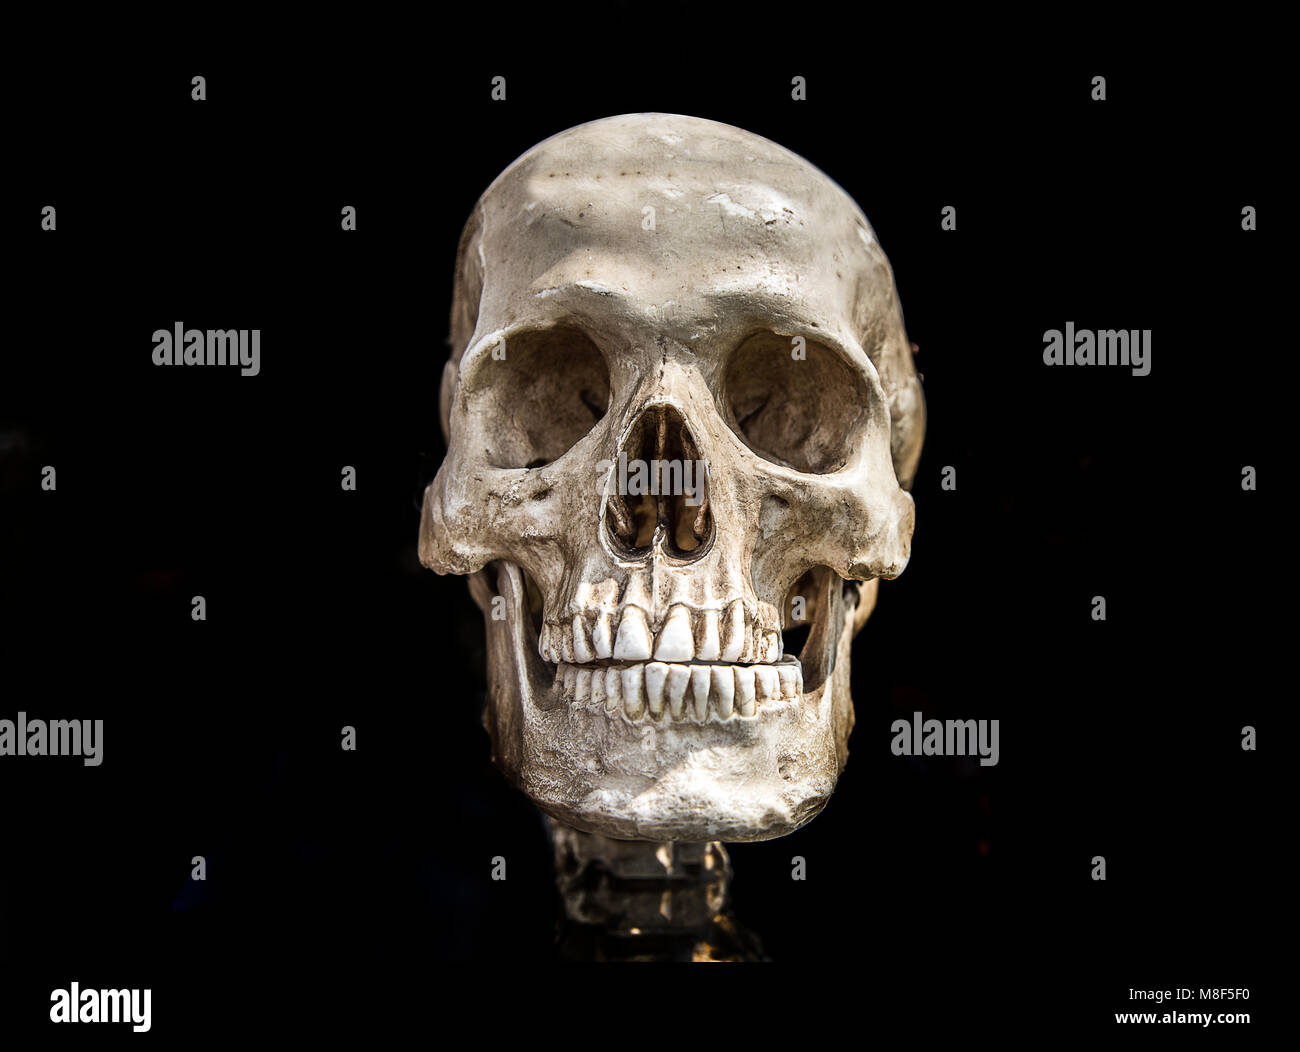 human scull on black isolate show history of human anatomy concept Stock Photo